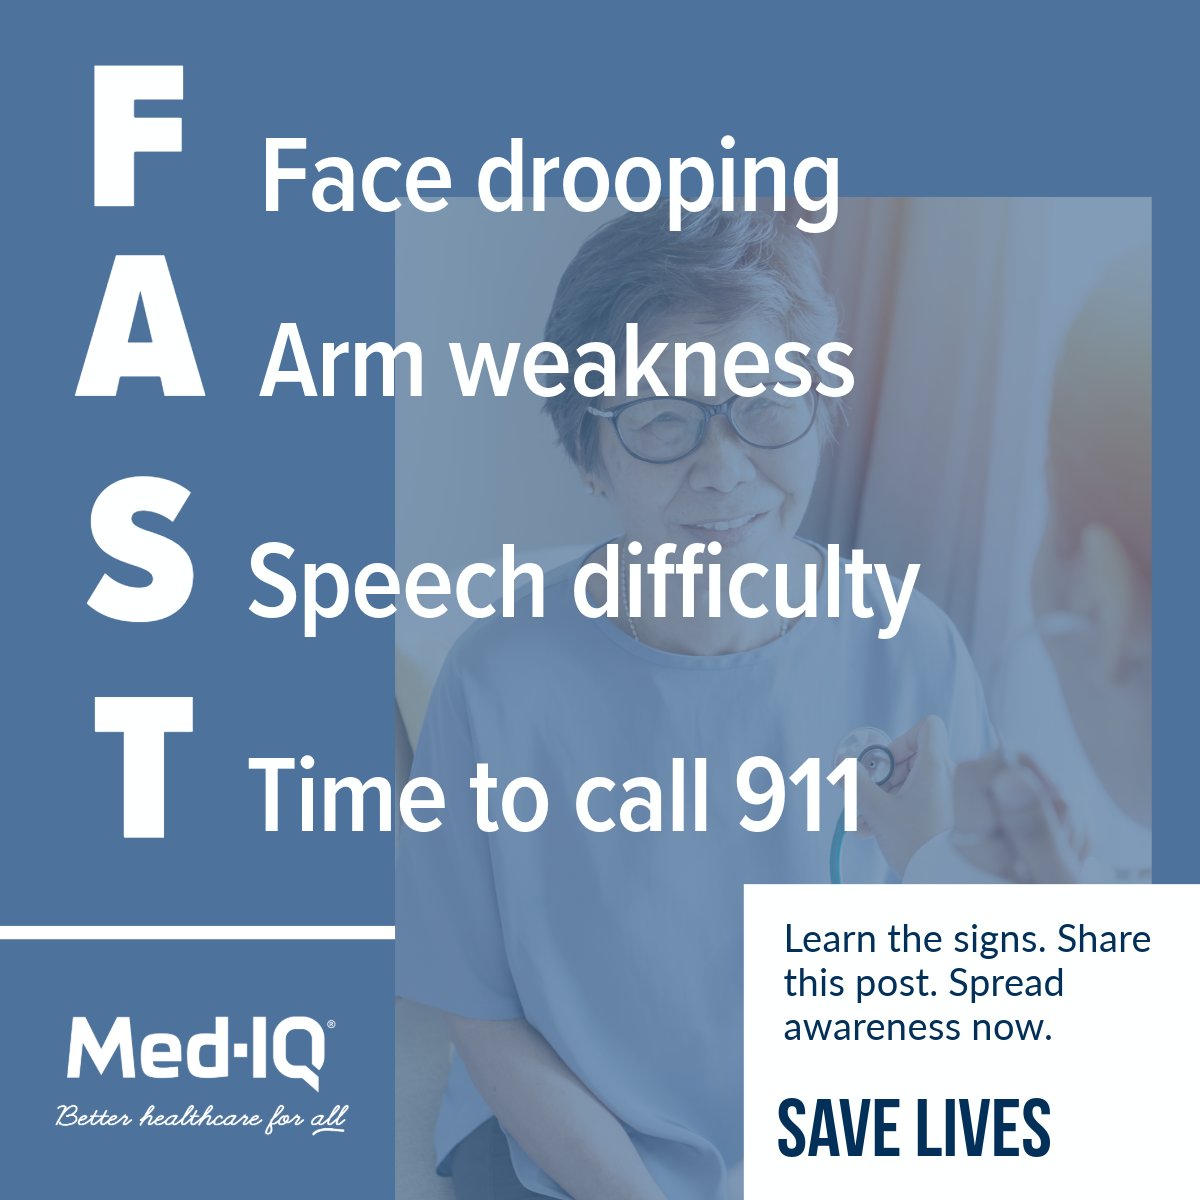 Did you know that someone in the US has a stroke every 40 seconds? Let's raise #strokeawareness for #betterhealthcareforall by learning to spot the early warning signs, F.A.S.T. We can make a difference in saving lives and promoting a healthier future for everyone.